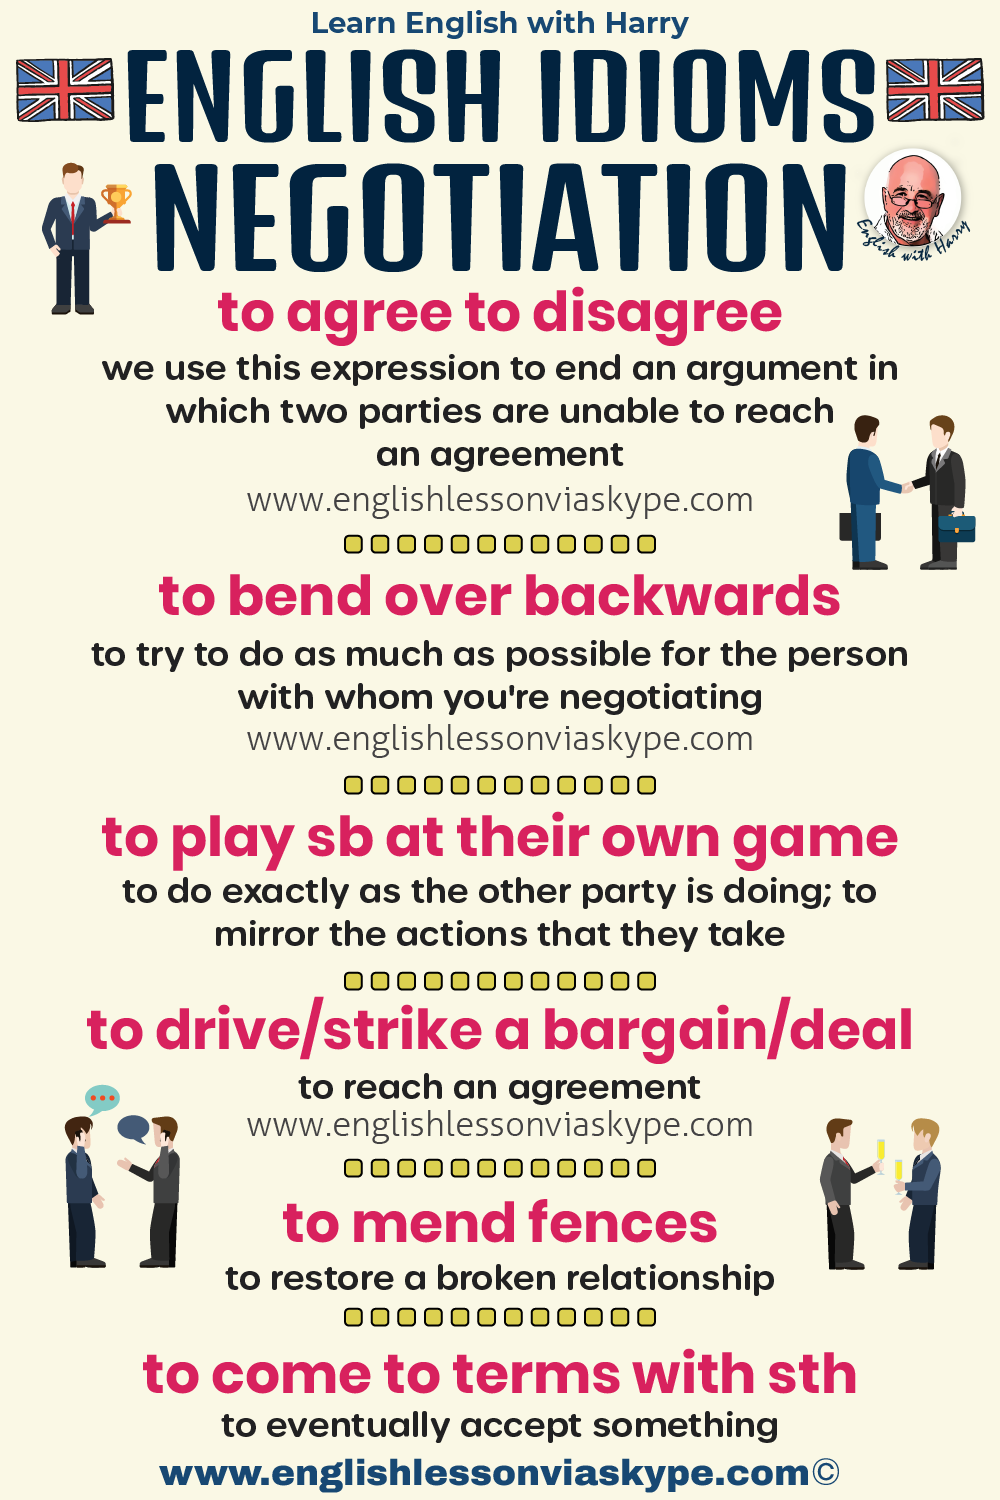 English Idioms About Negotiation • Speak better English with Harry 👴